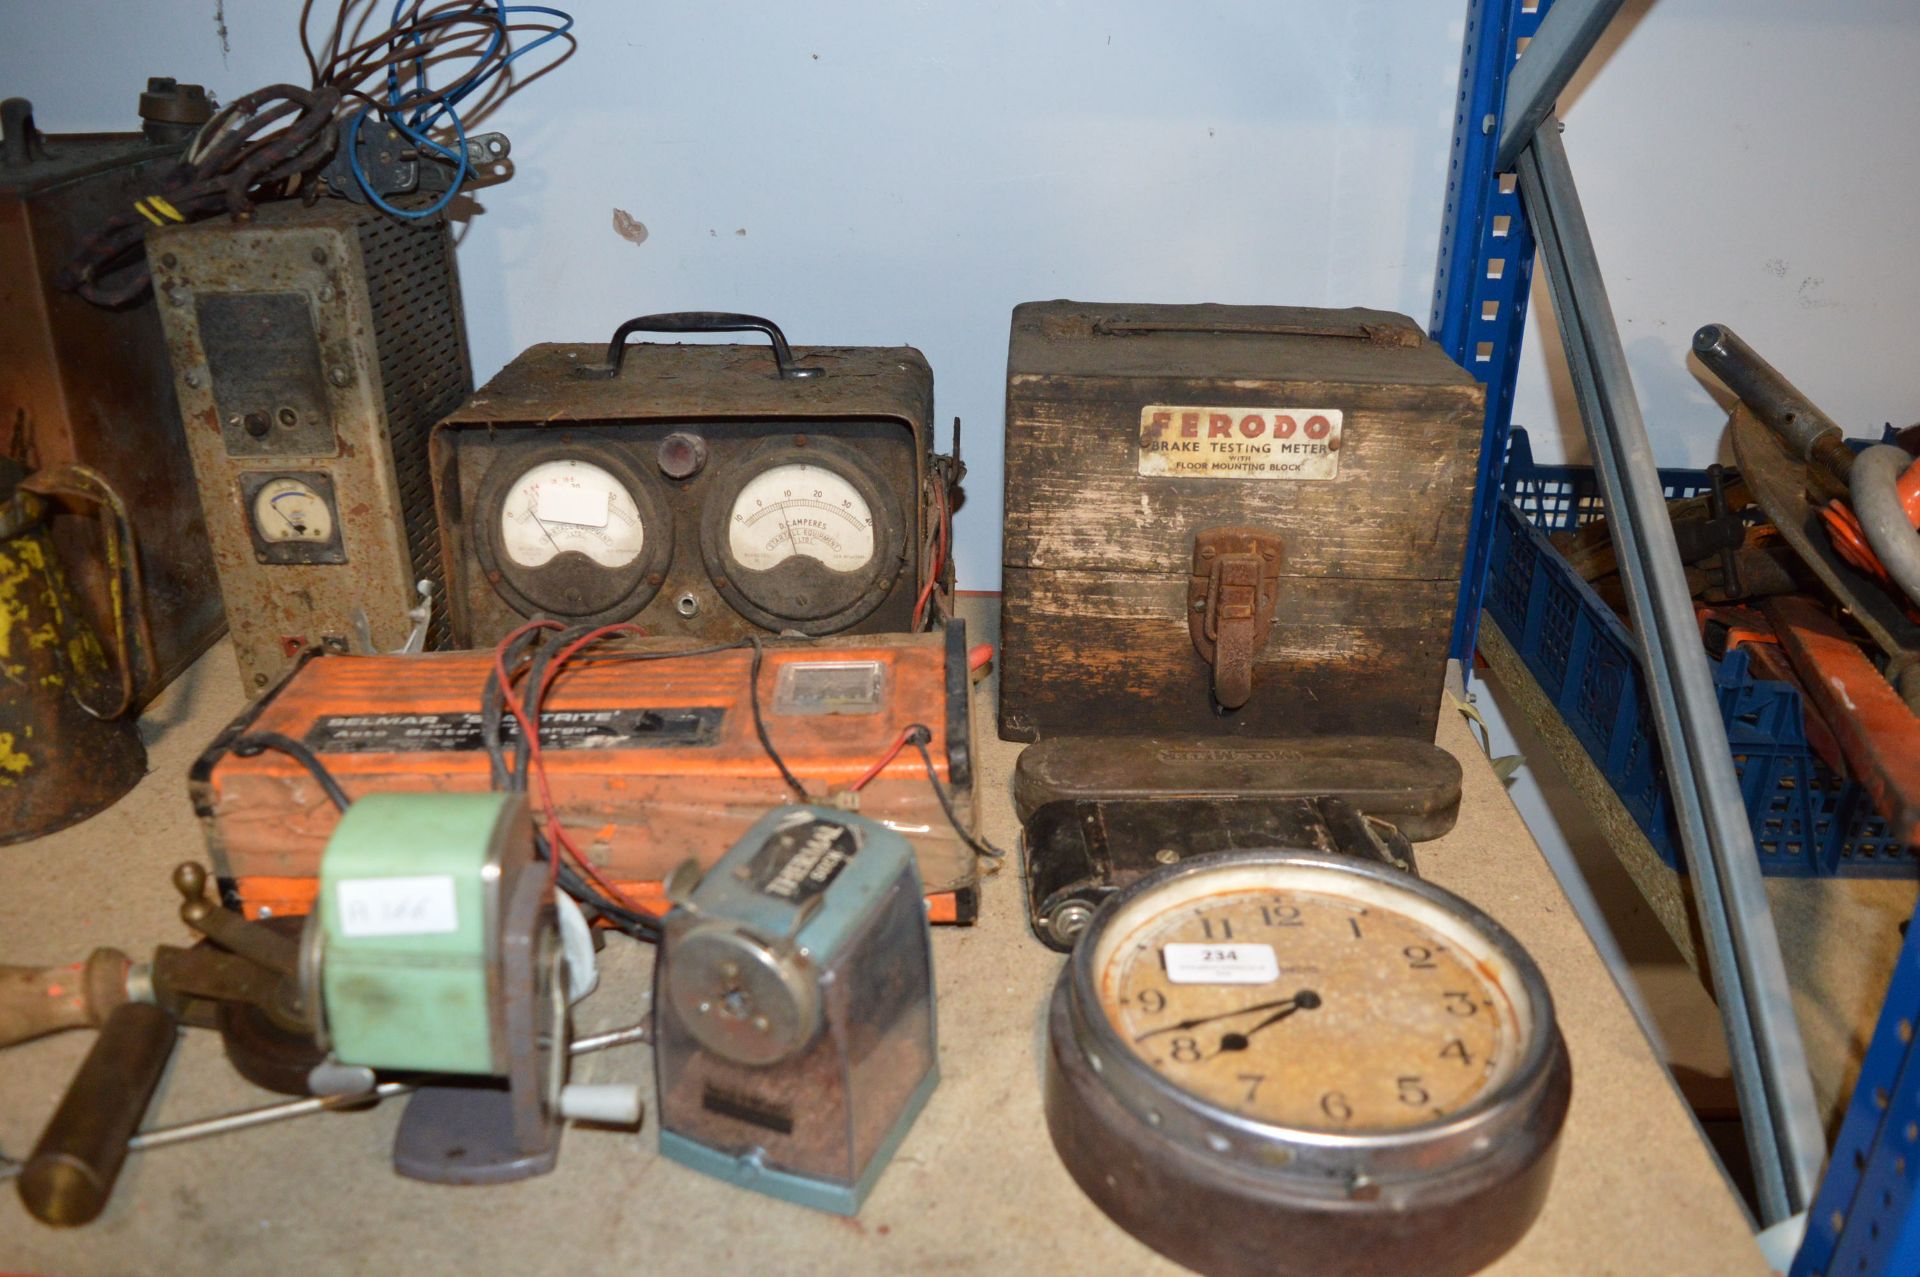 Mixed Lot Including Auto Battery Charger, Pencil Sharpeners, Cameras, Brake Testing Meters, etc.